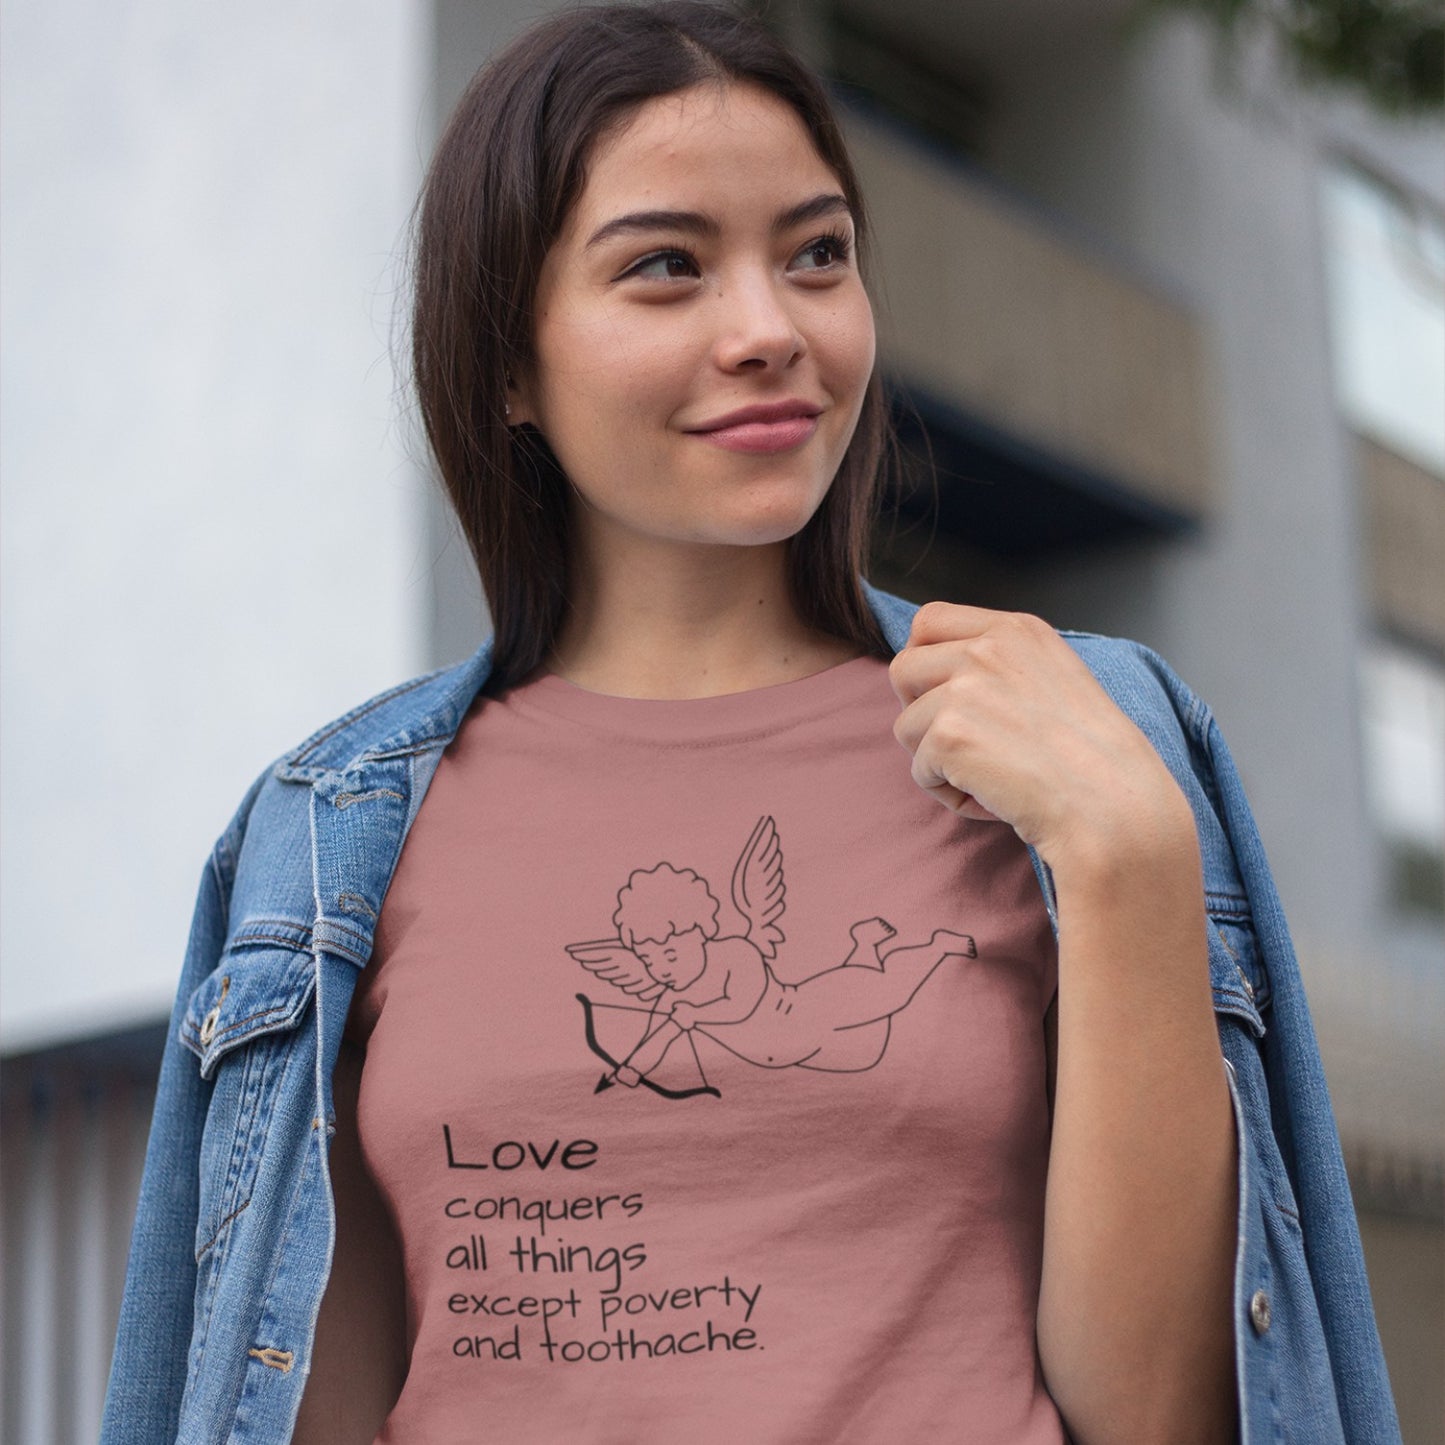 LOVE Conquers All Things Except Poverty and Toothache Unisex t-shirt, Mae West Quote, Cinema Quote